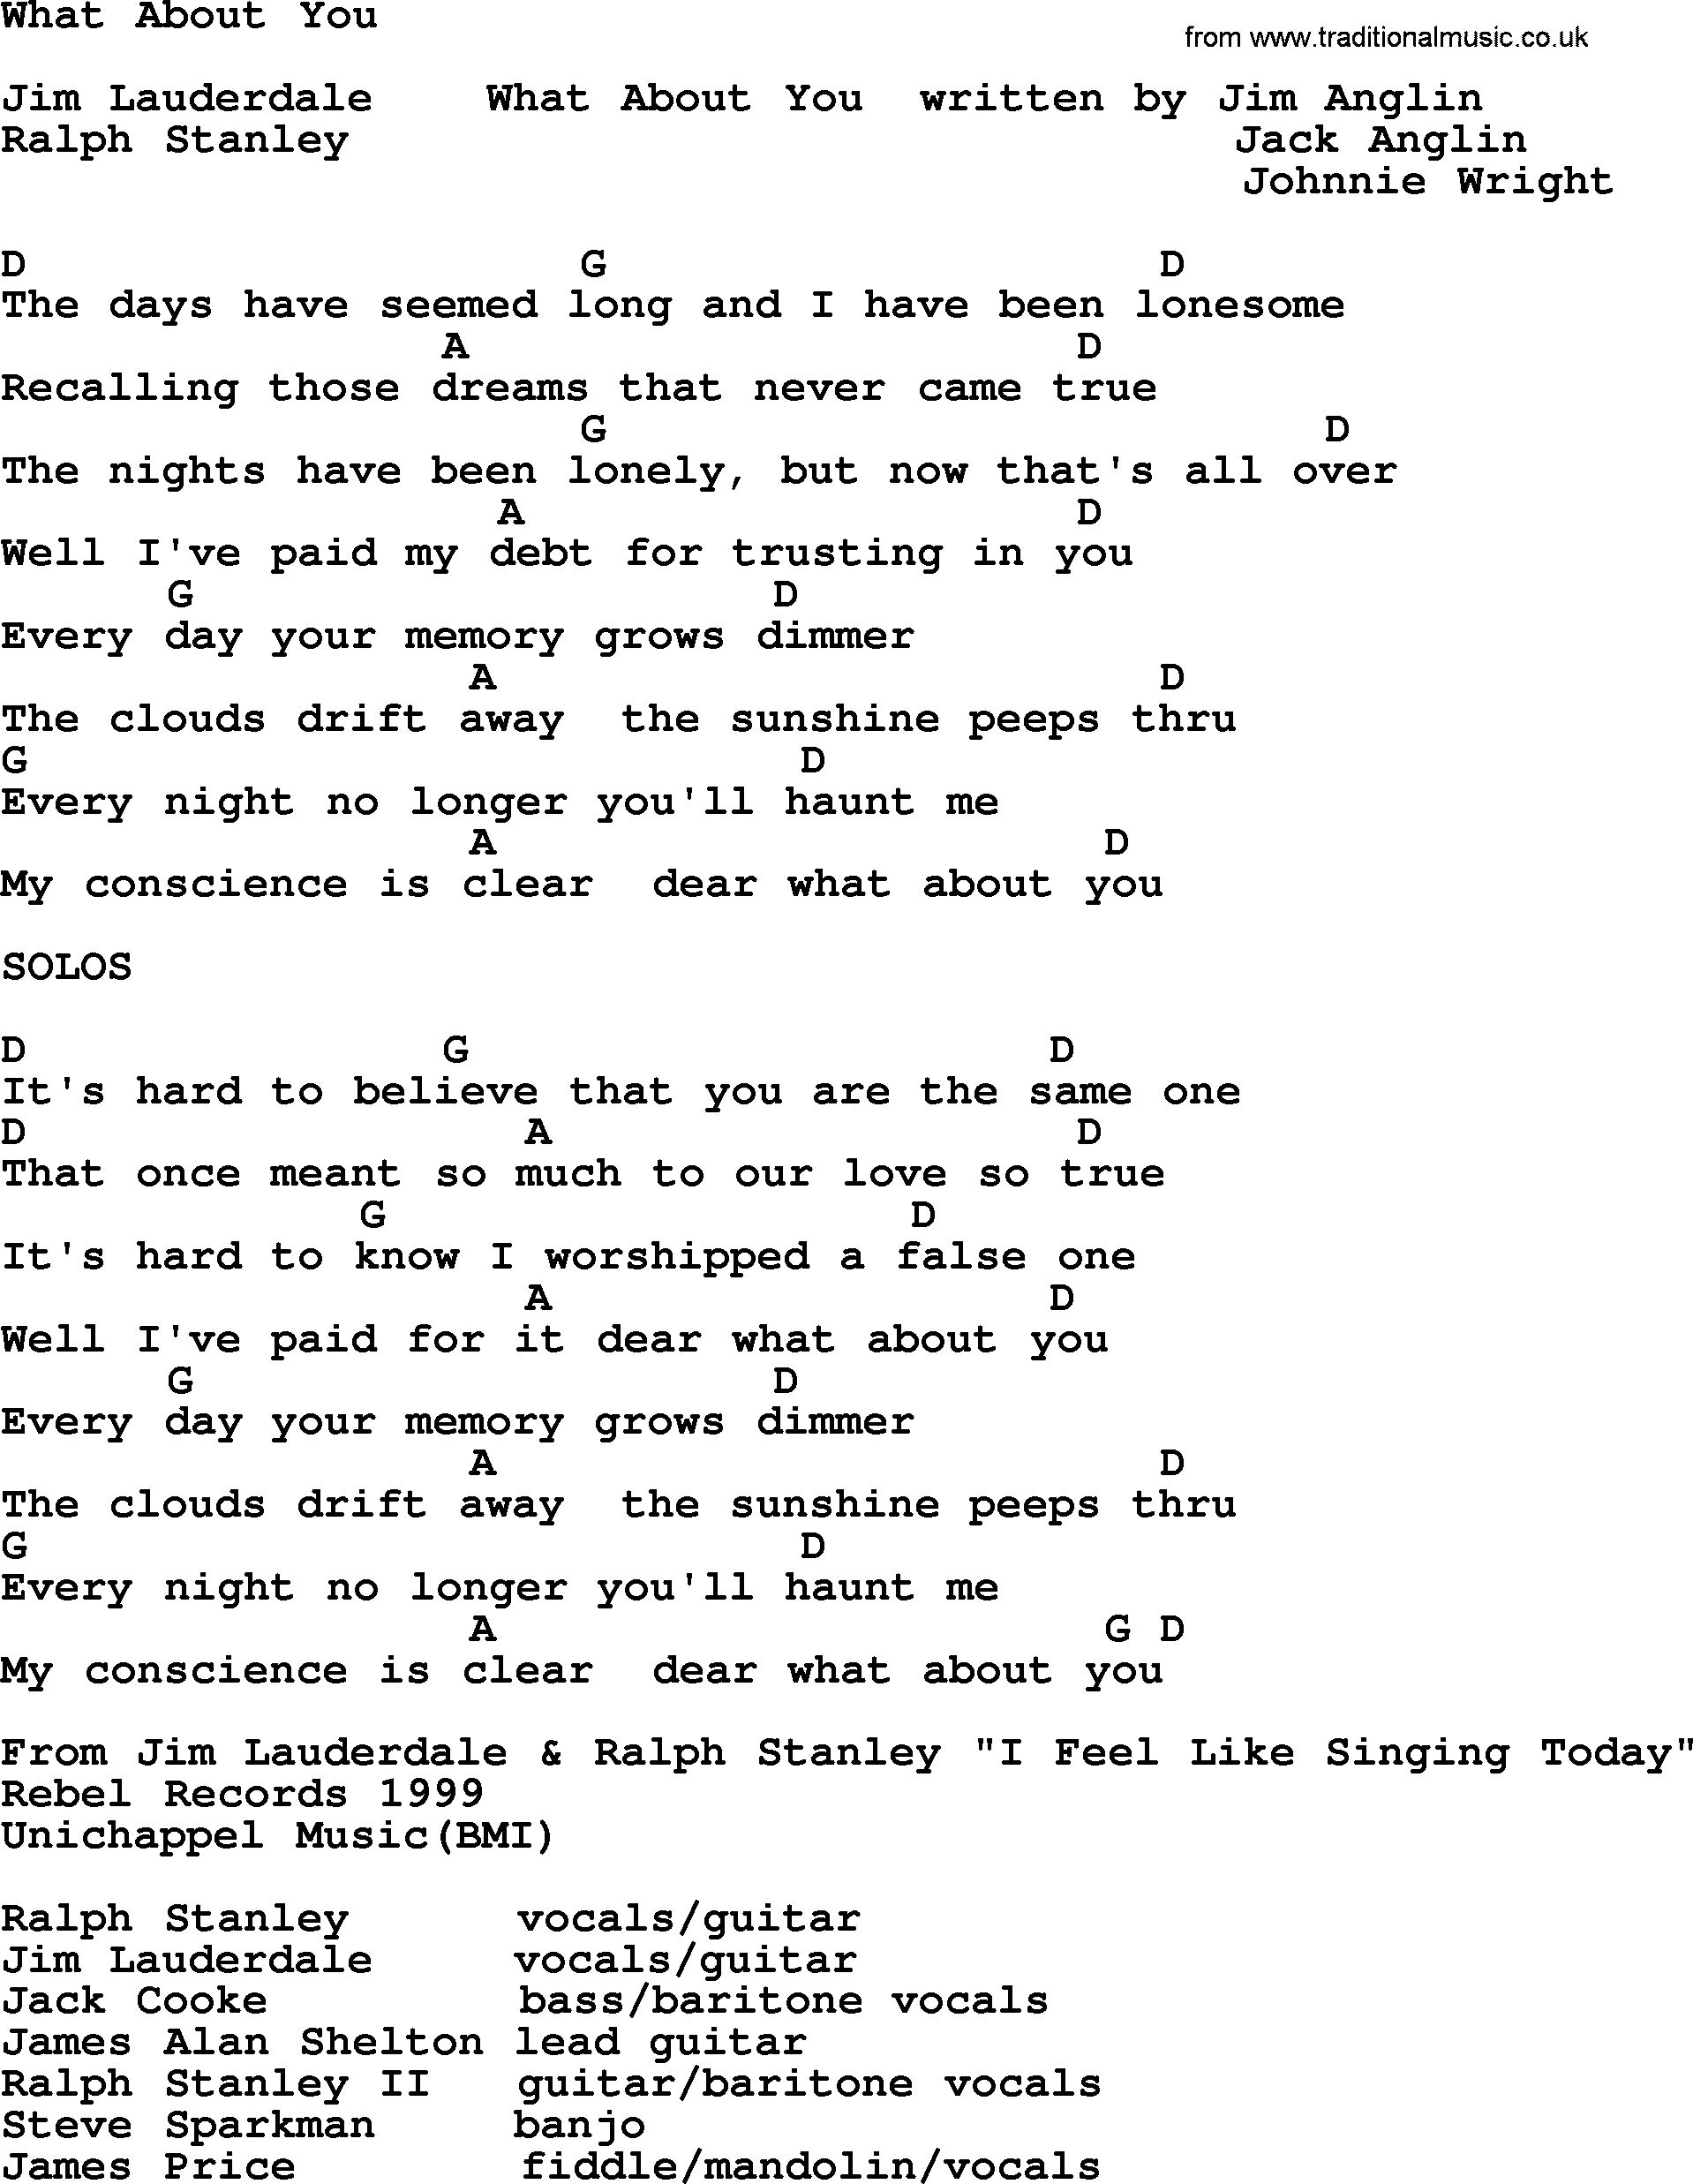 Bluegrass song: What About You, lyrics and chords